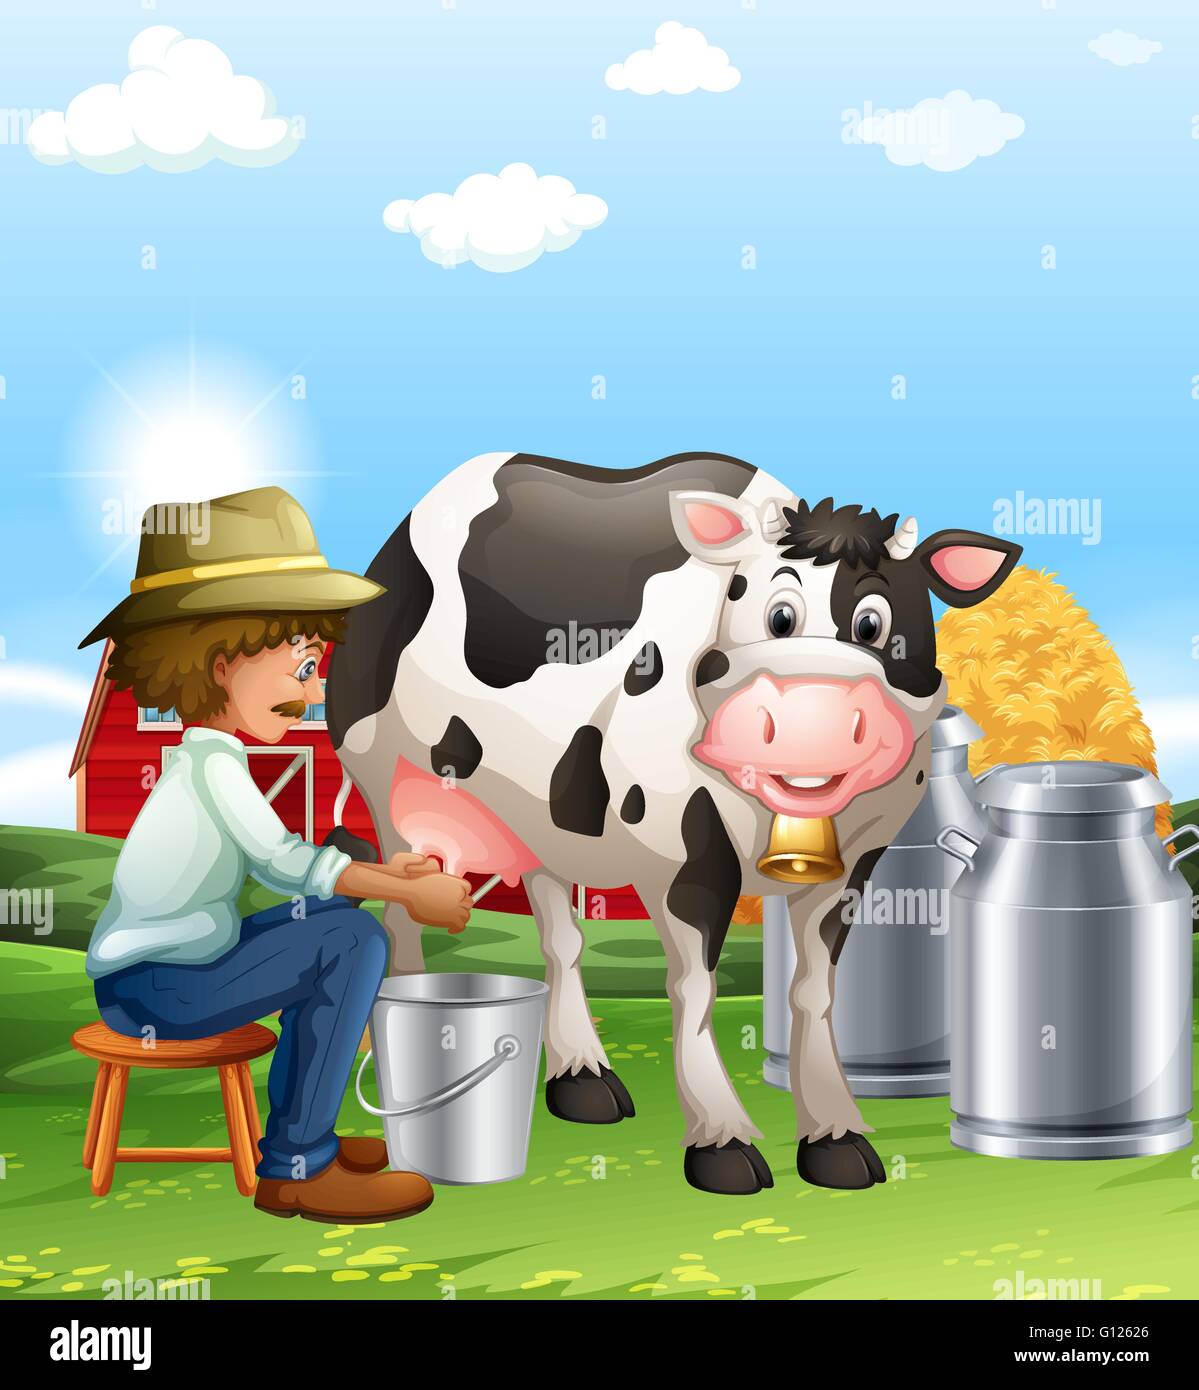 Farmer milking a cow at daytime illustration Stock Vector